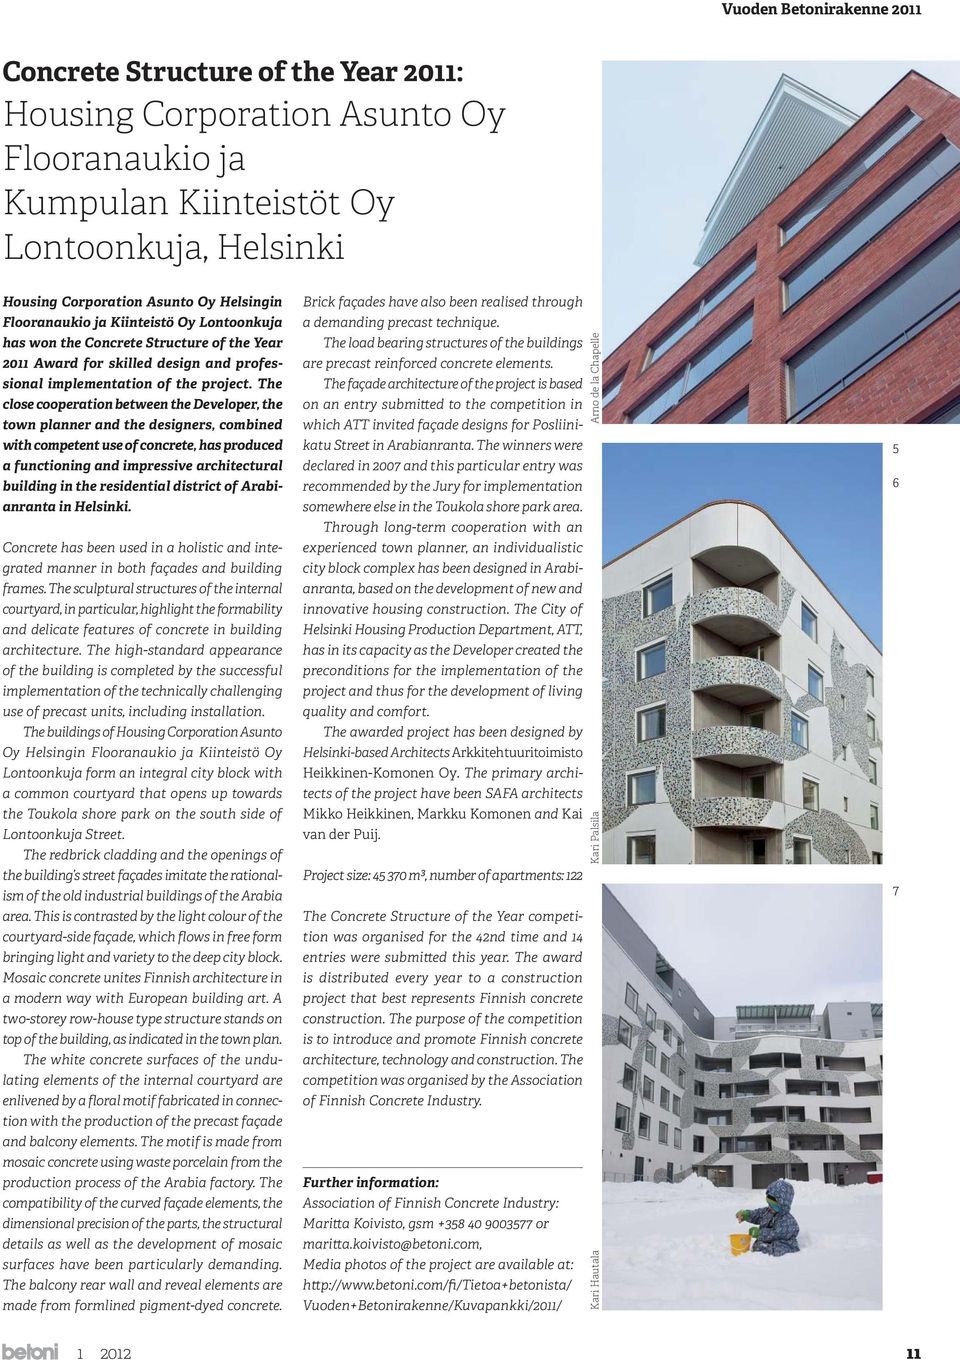 The close cooperation between the Developer, the town planner and the designers, combined with competent use of concrete, has produced a functioning and impressive architectural building in the